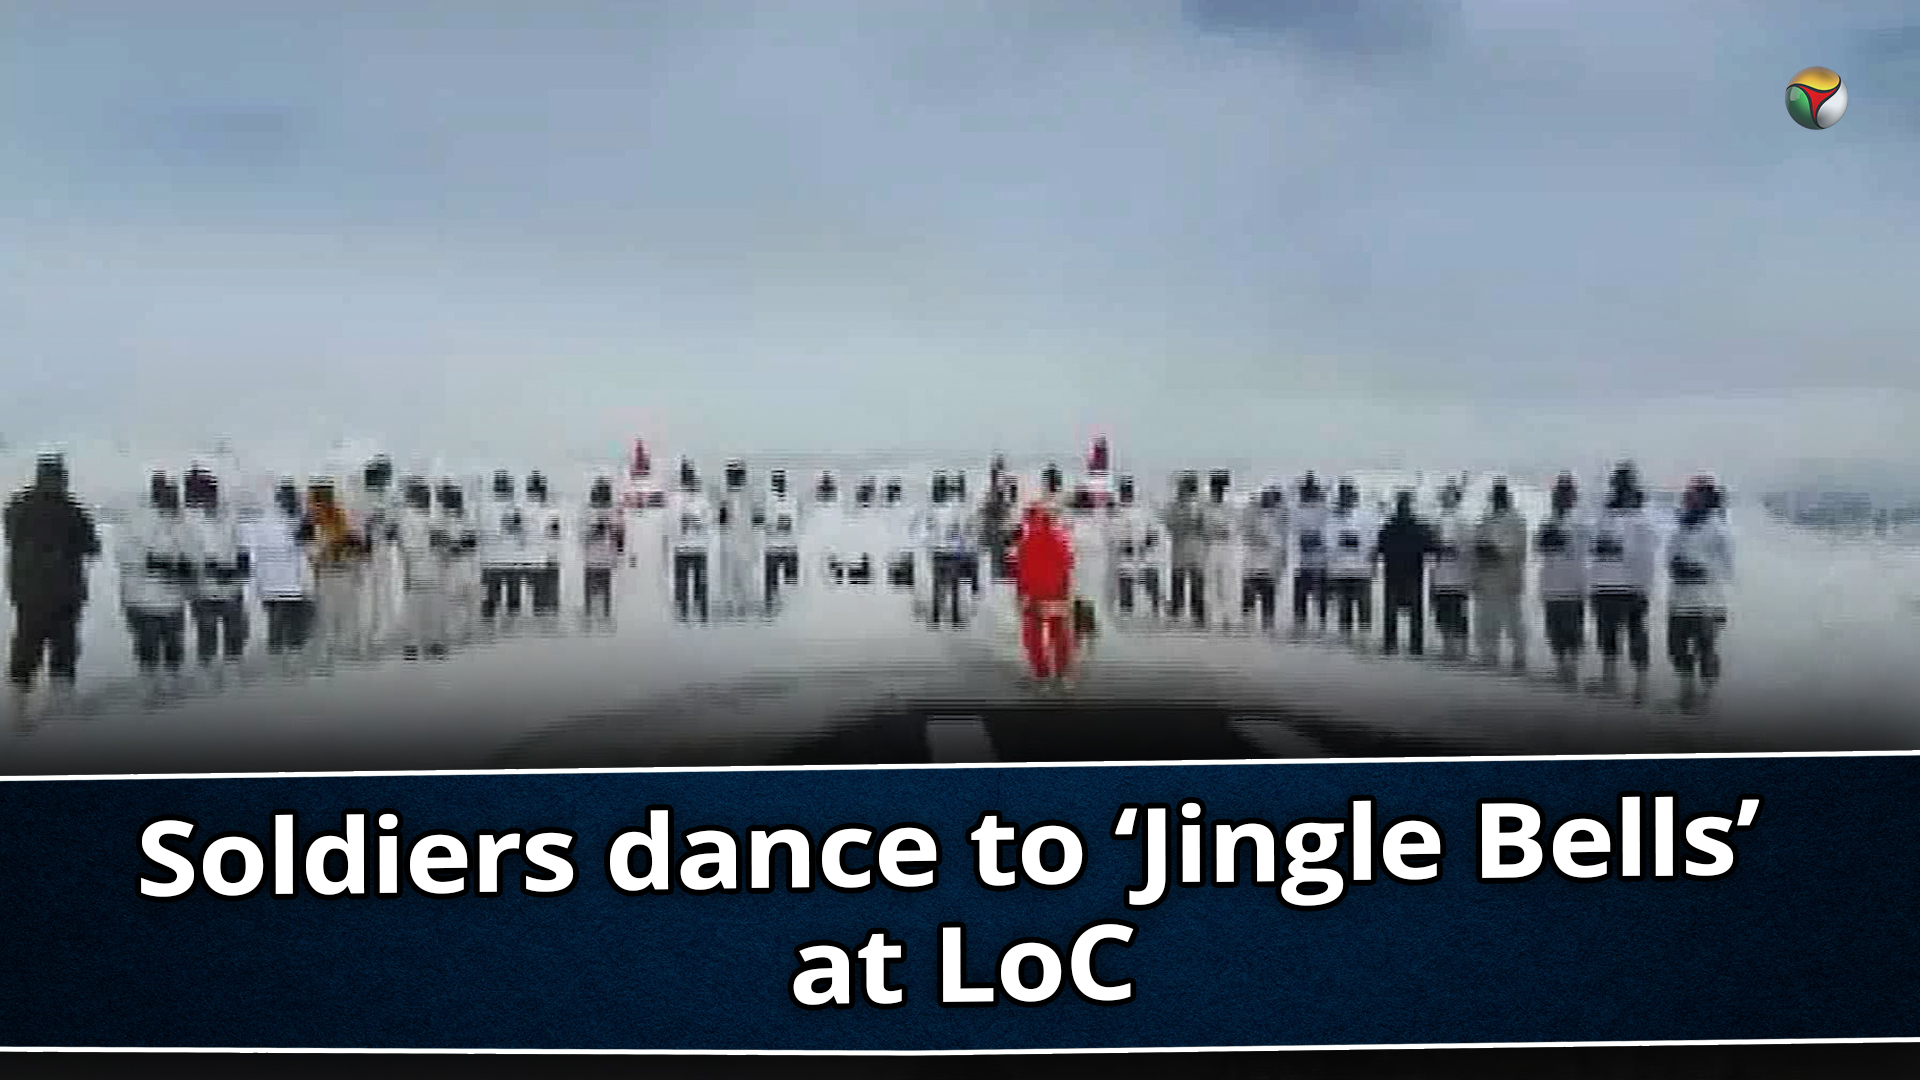 Soldiers dance to Jingle Bells at LoC